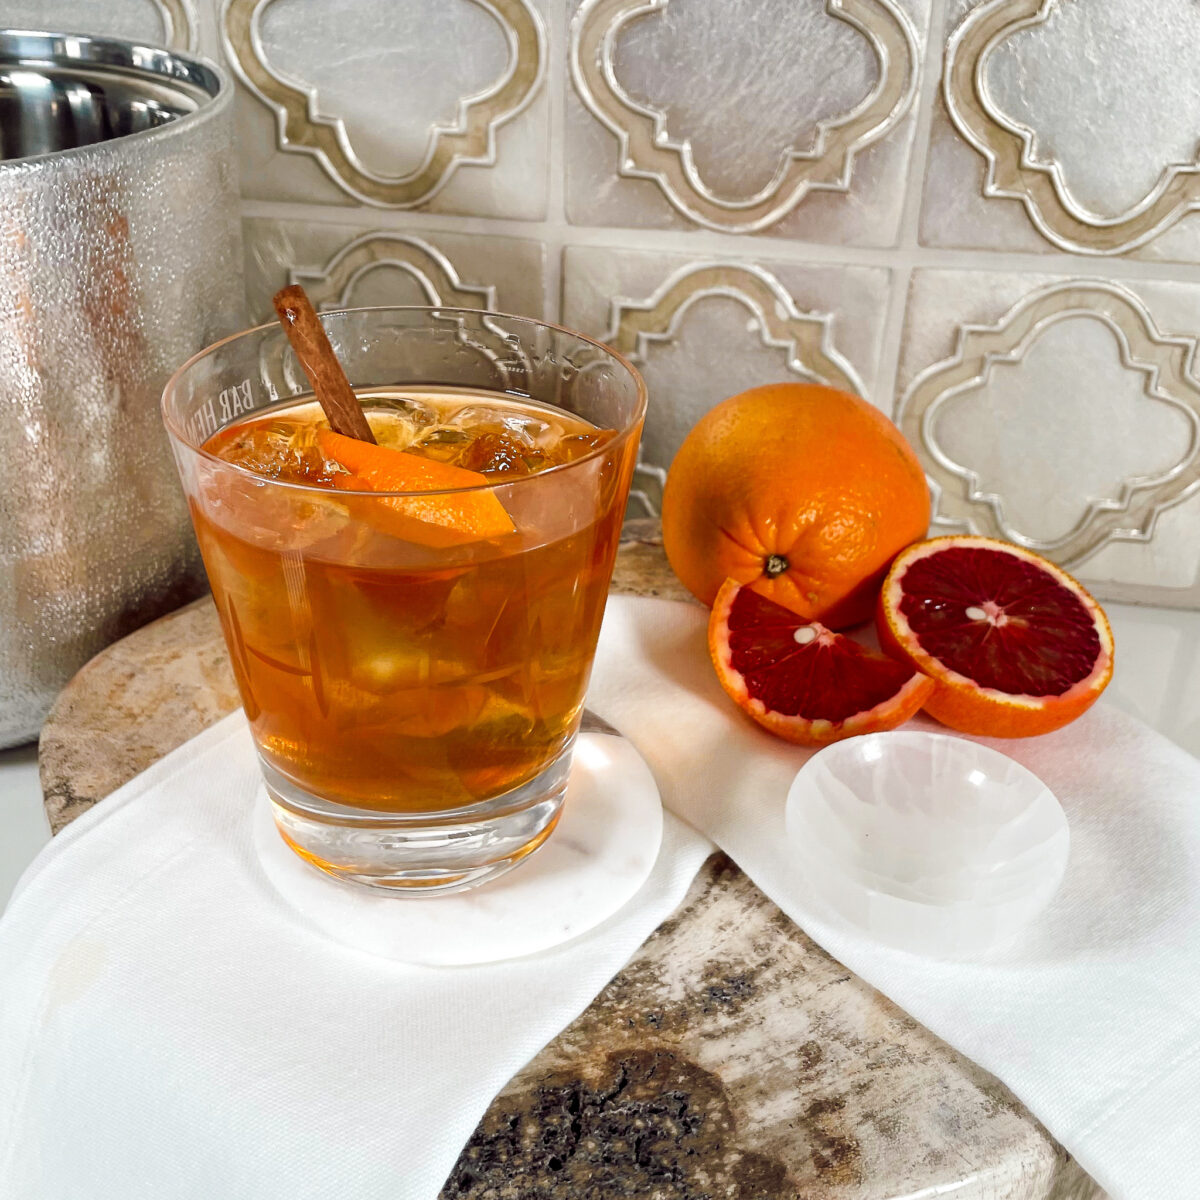 2021-NOV_RENEE-PARSONS_WHATS-ON-THE-TABLE_NEGRONI_002